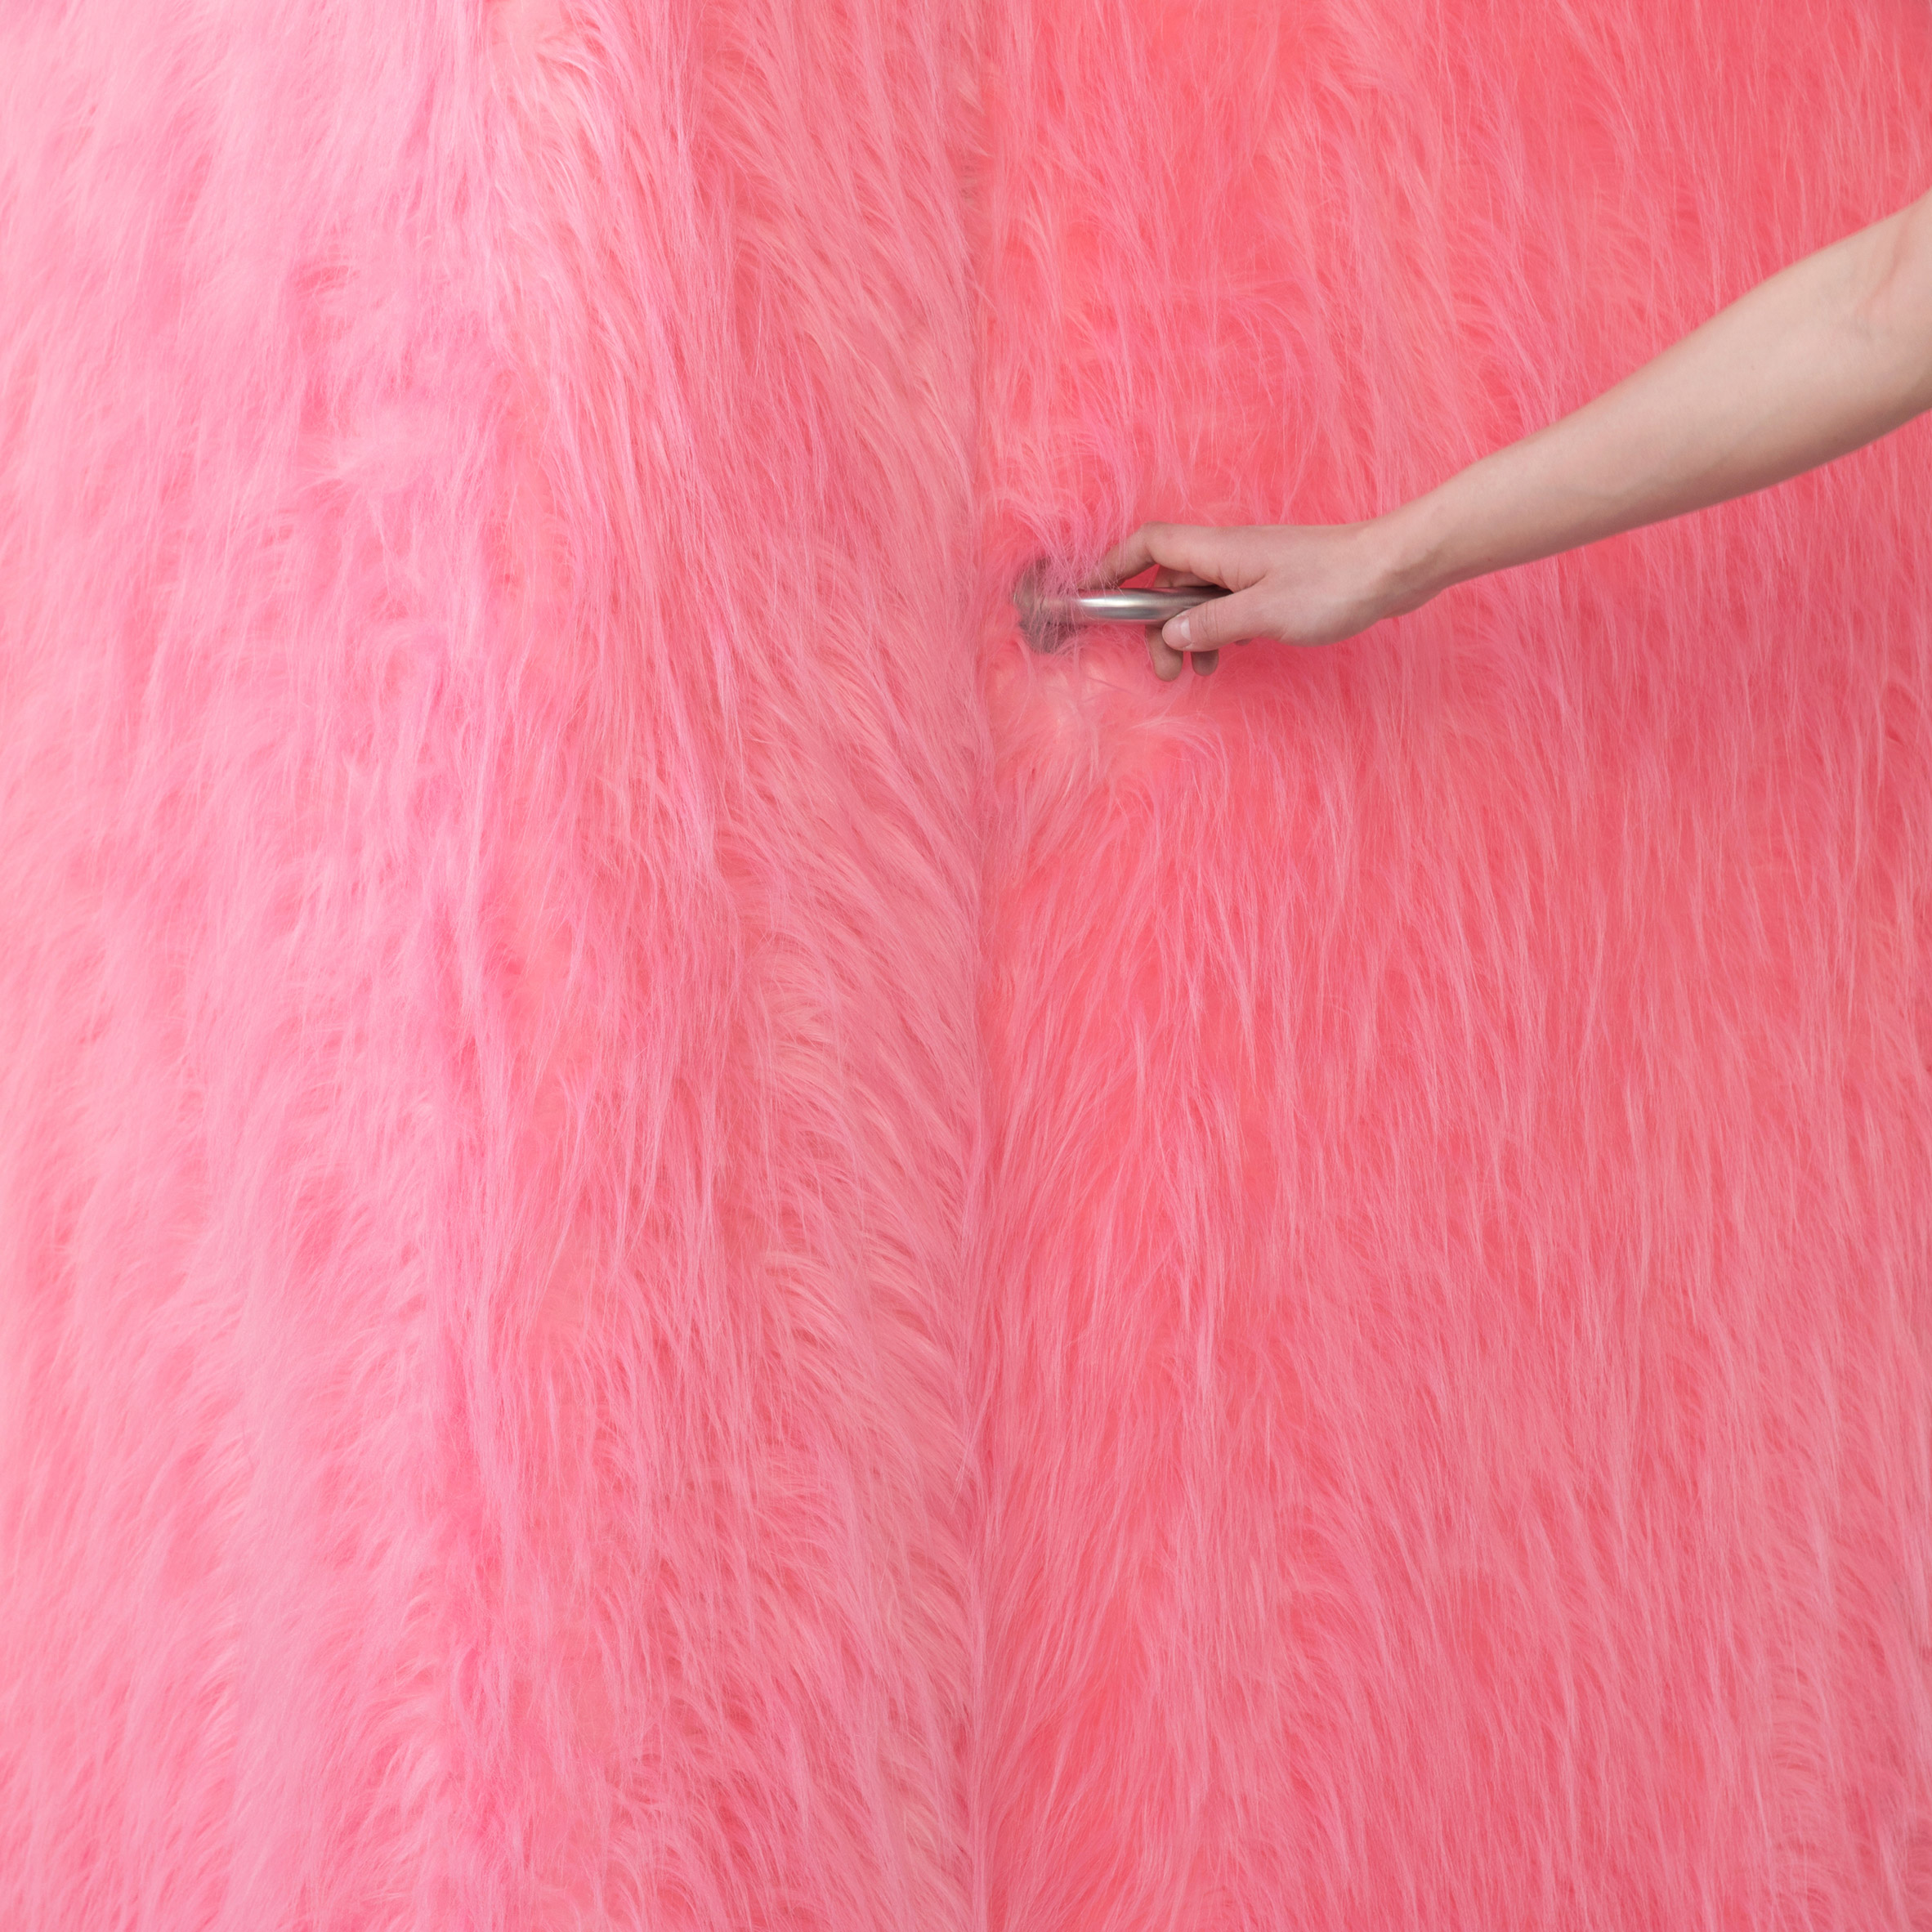 Pink furry walls and vibrant yellow surfaces brighten Russian clothing store